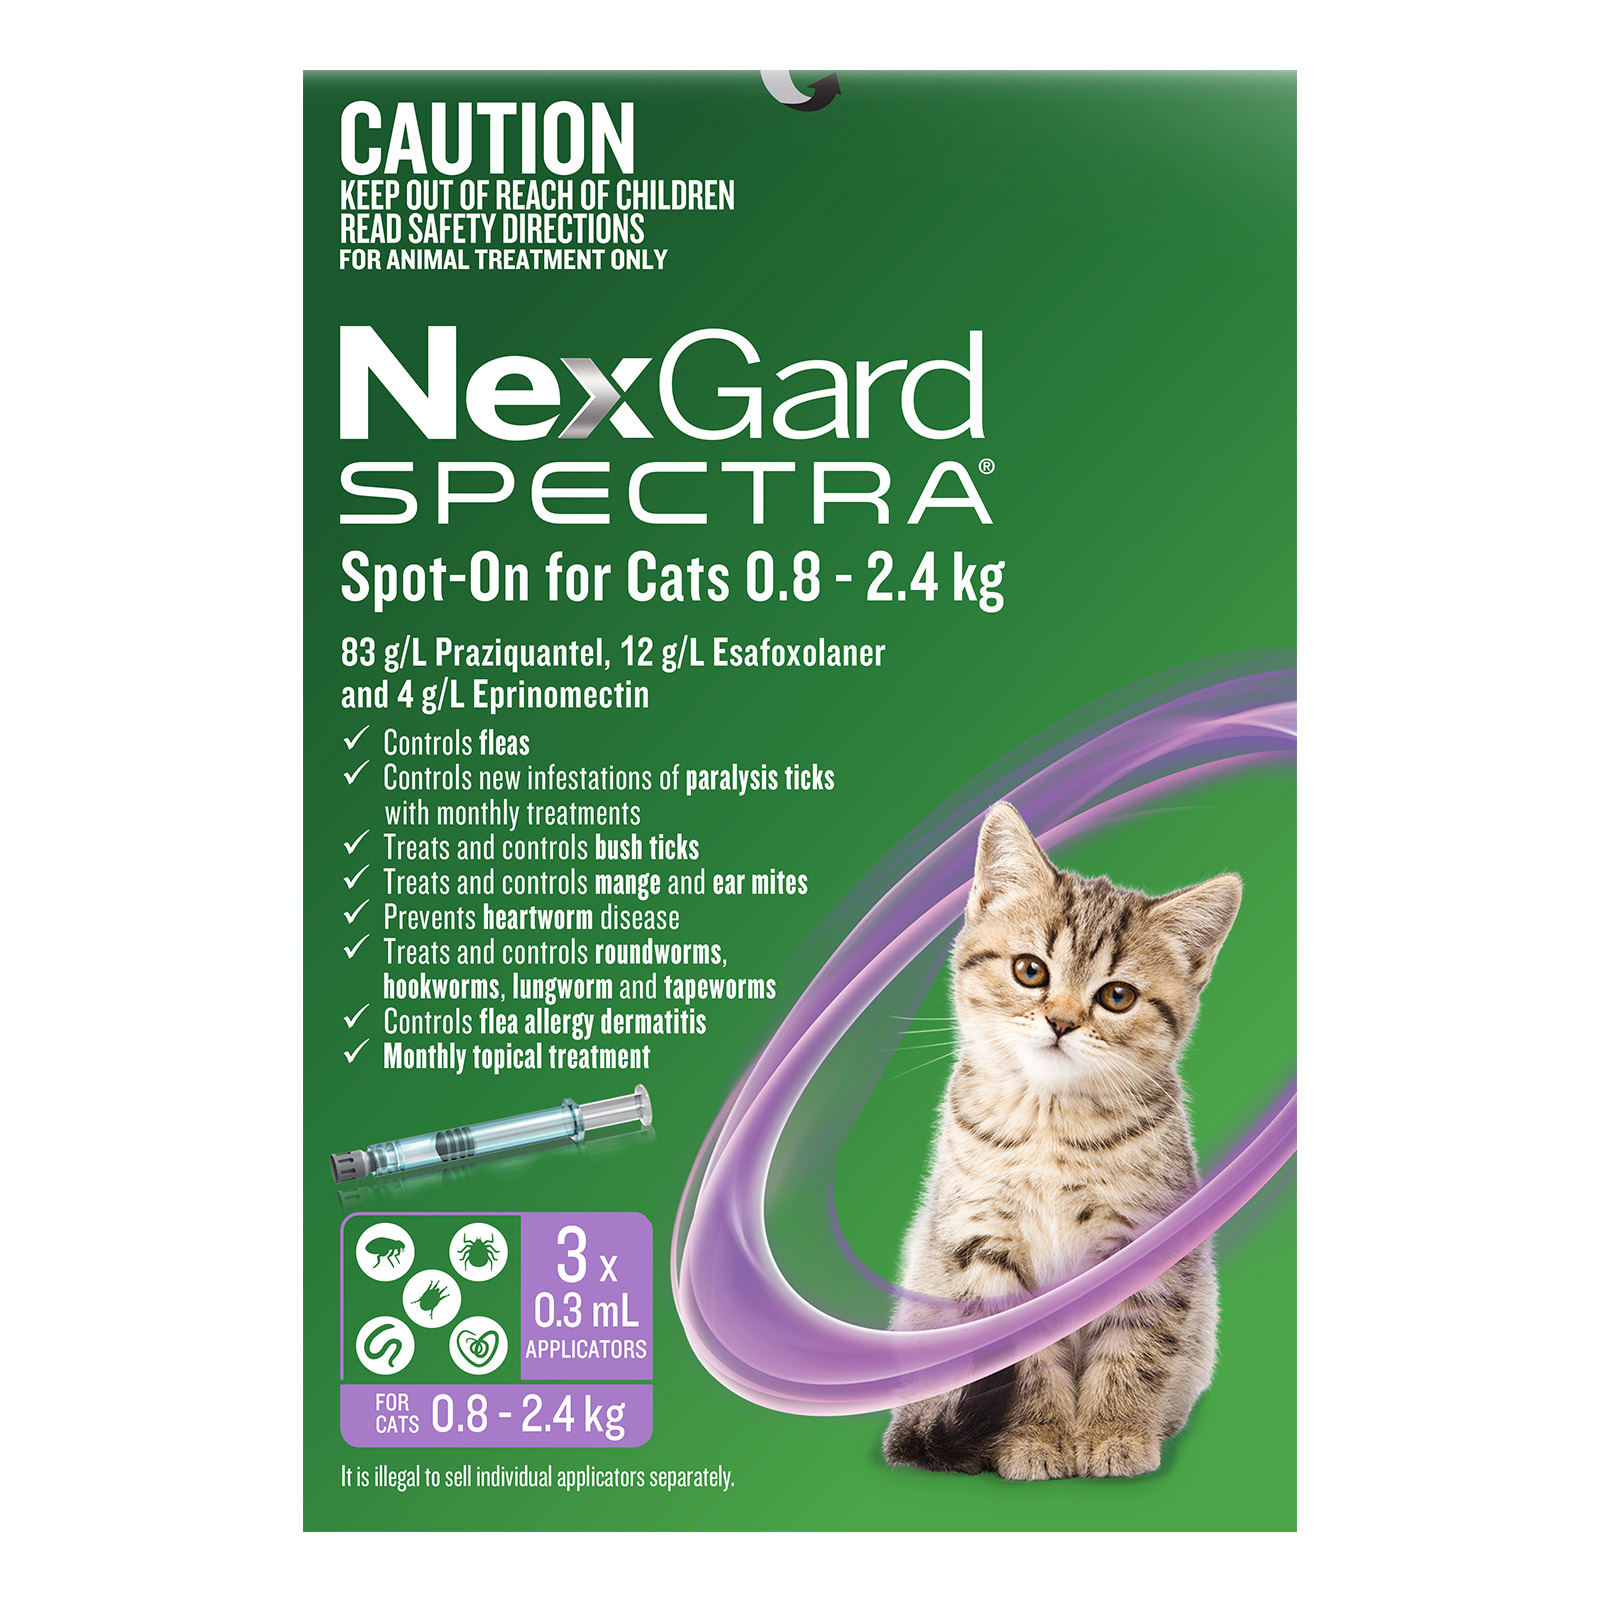 Nexgard Spectra for Kittens and Small Cats 0.8 to 2.4kg